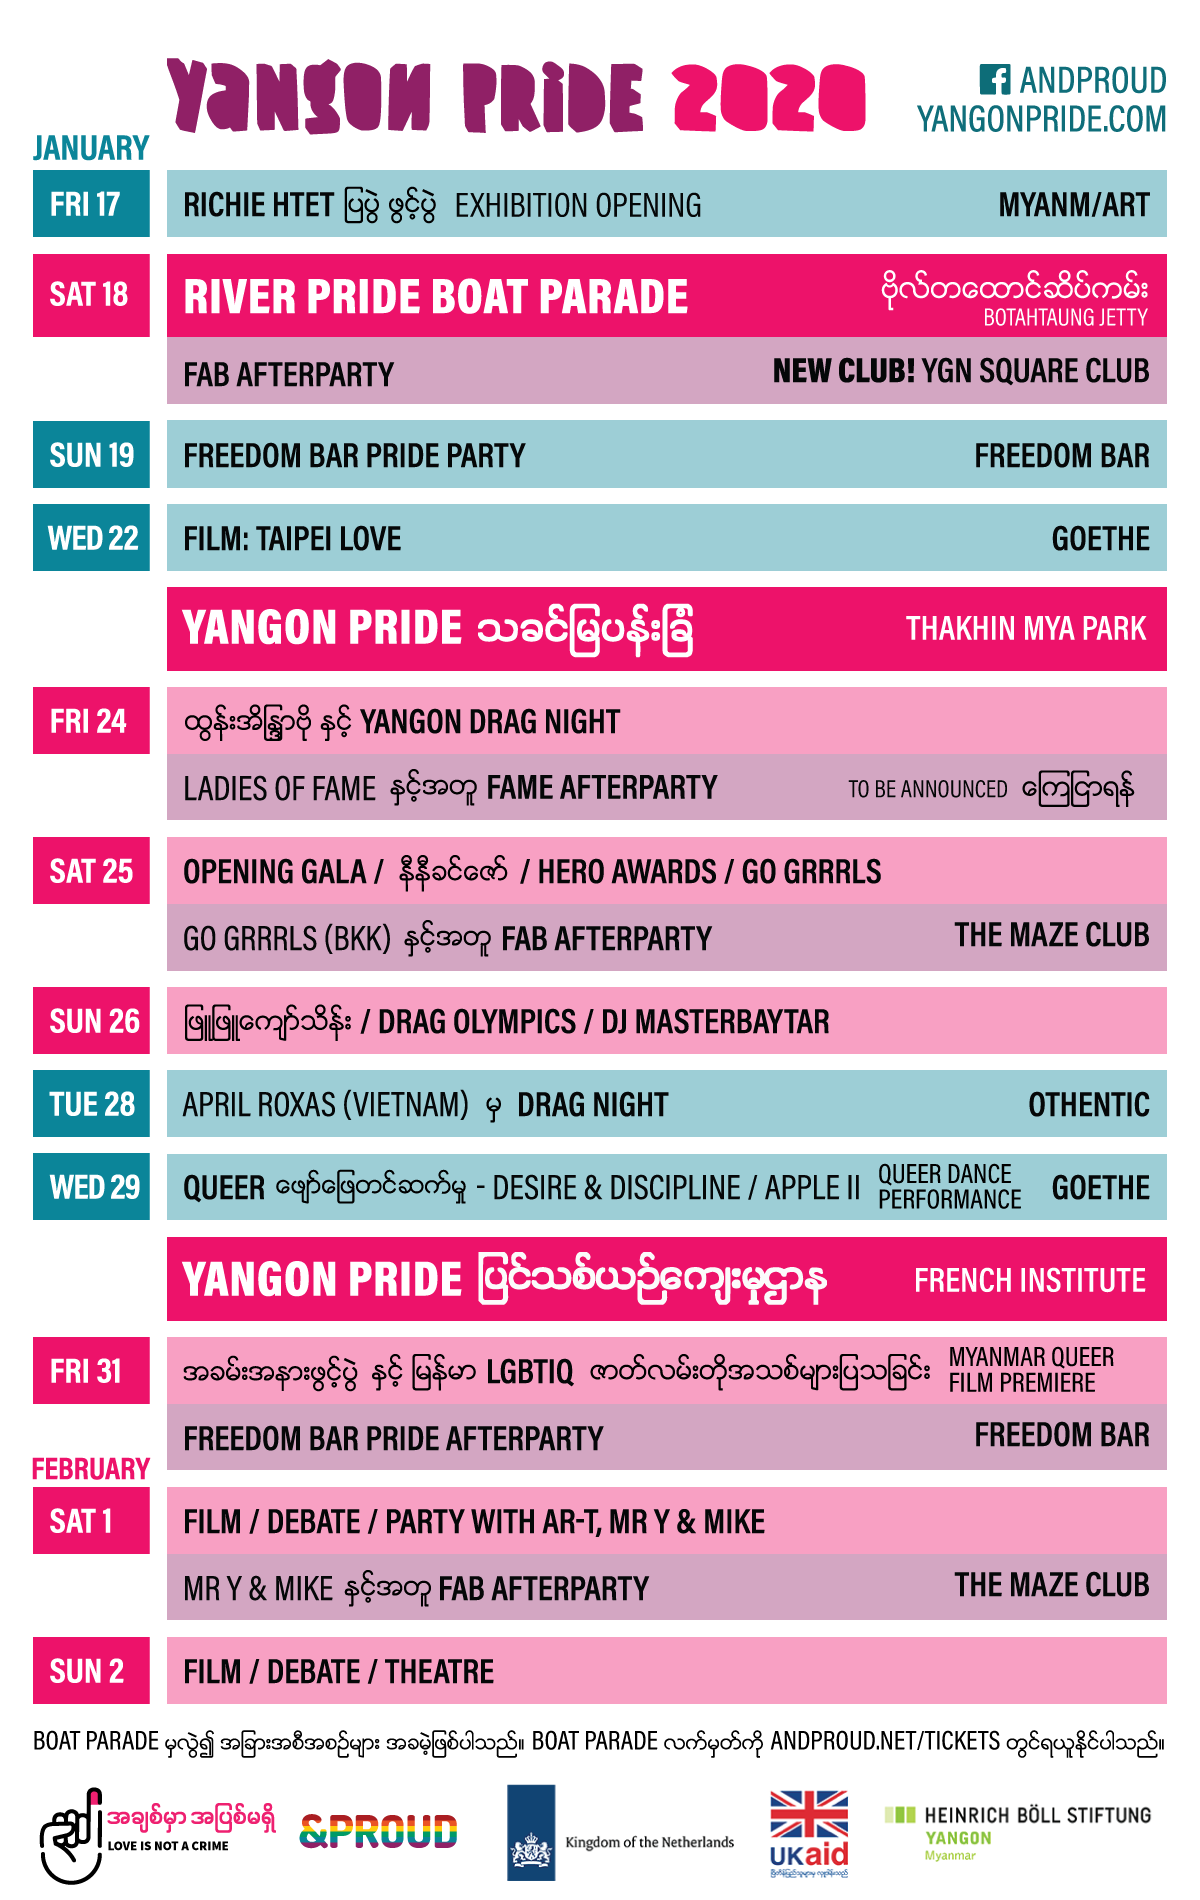 The schedule for this year's &PROUD’s festival Yangon Pride.